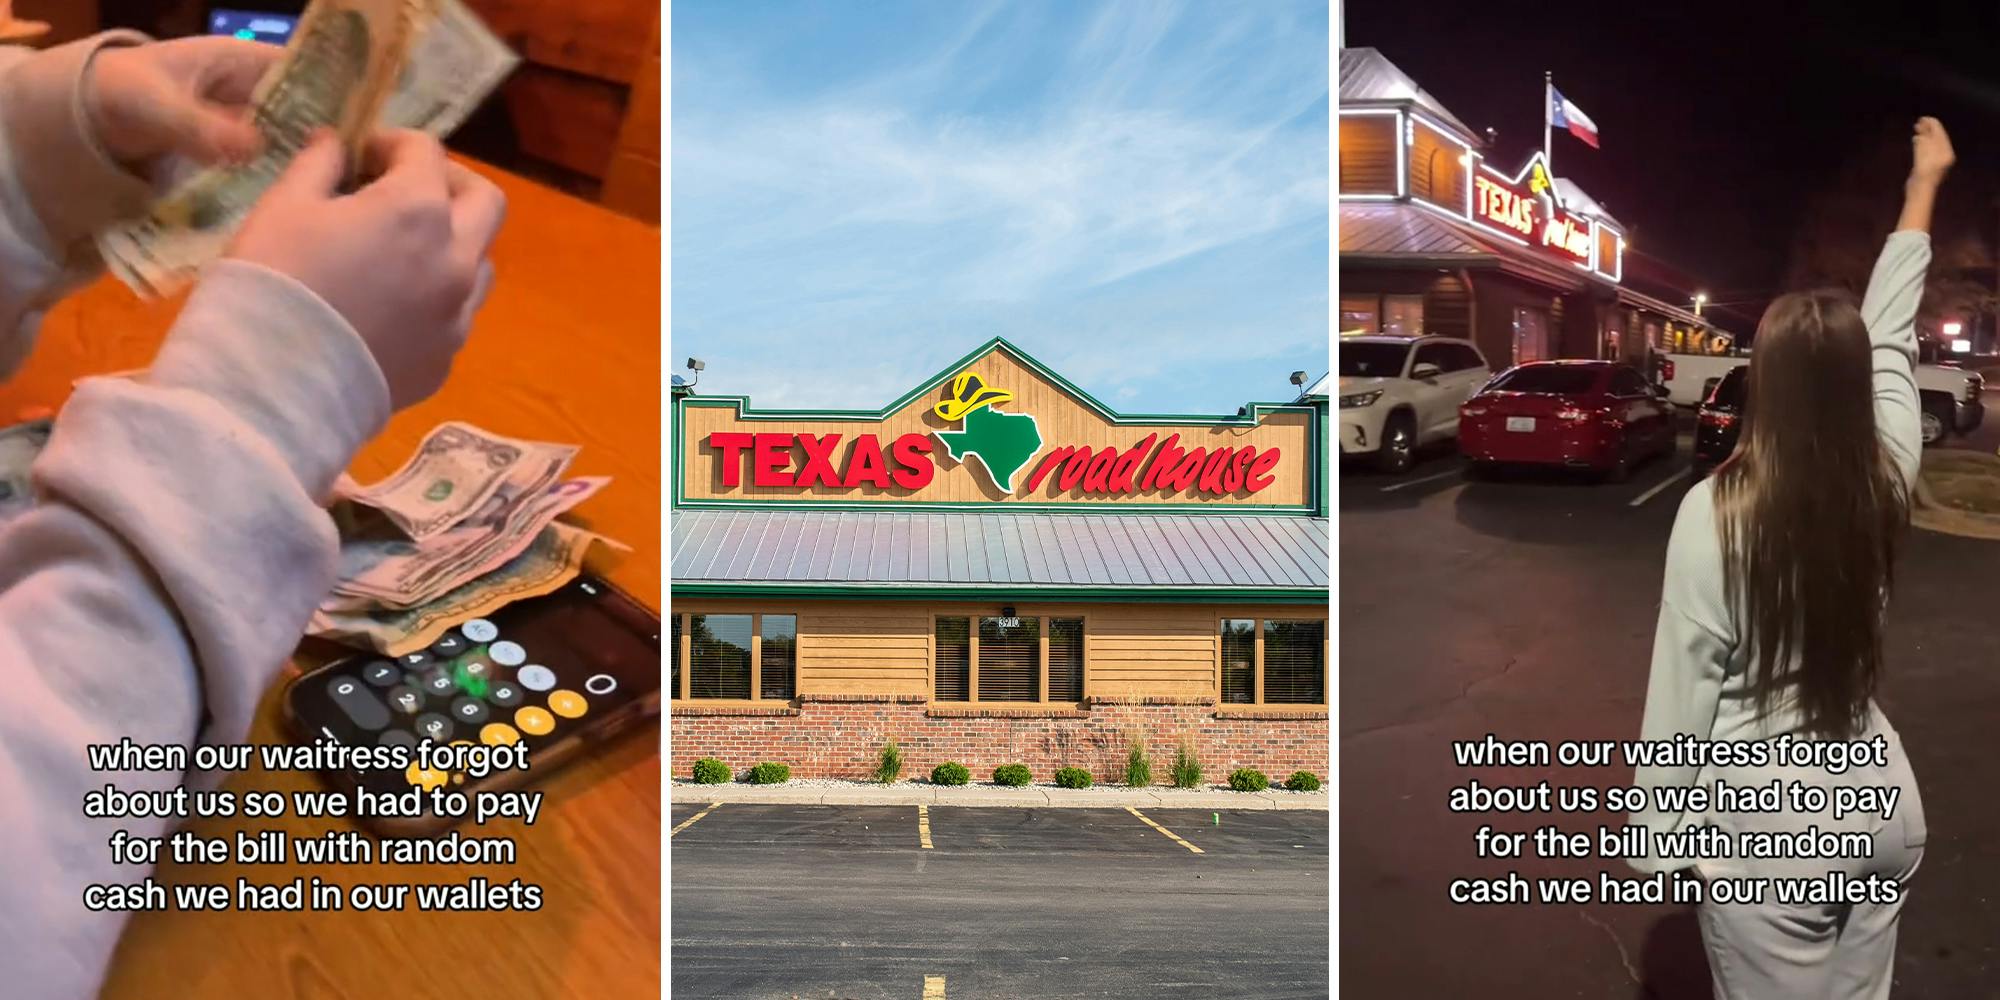 Texas Roadhouse customers scramble for cash after server forgets bill